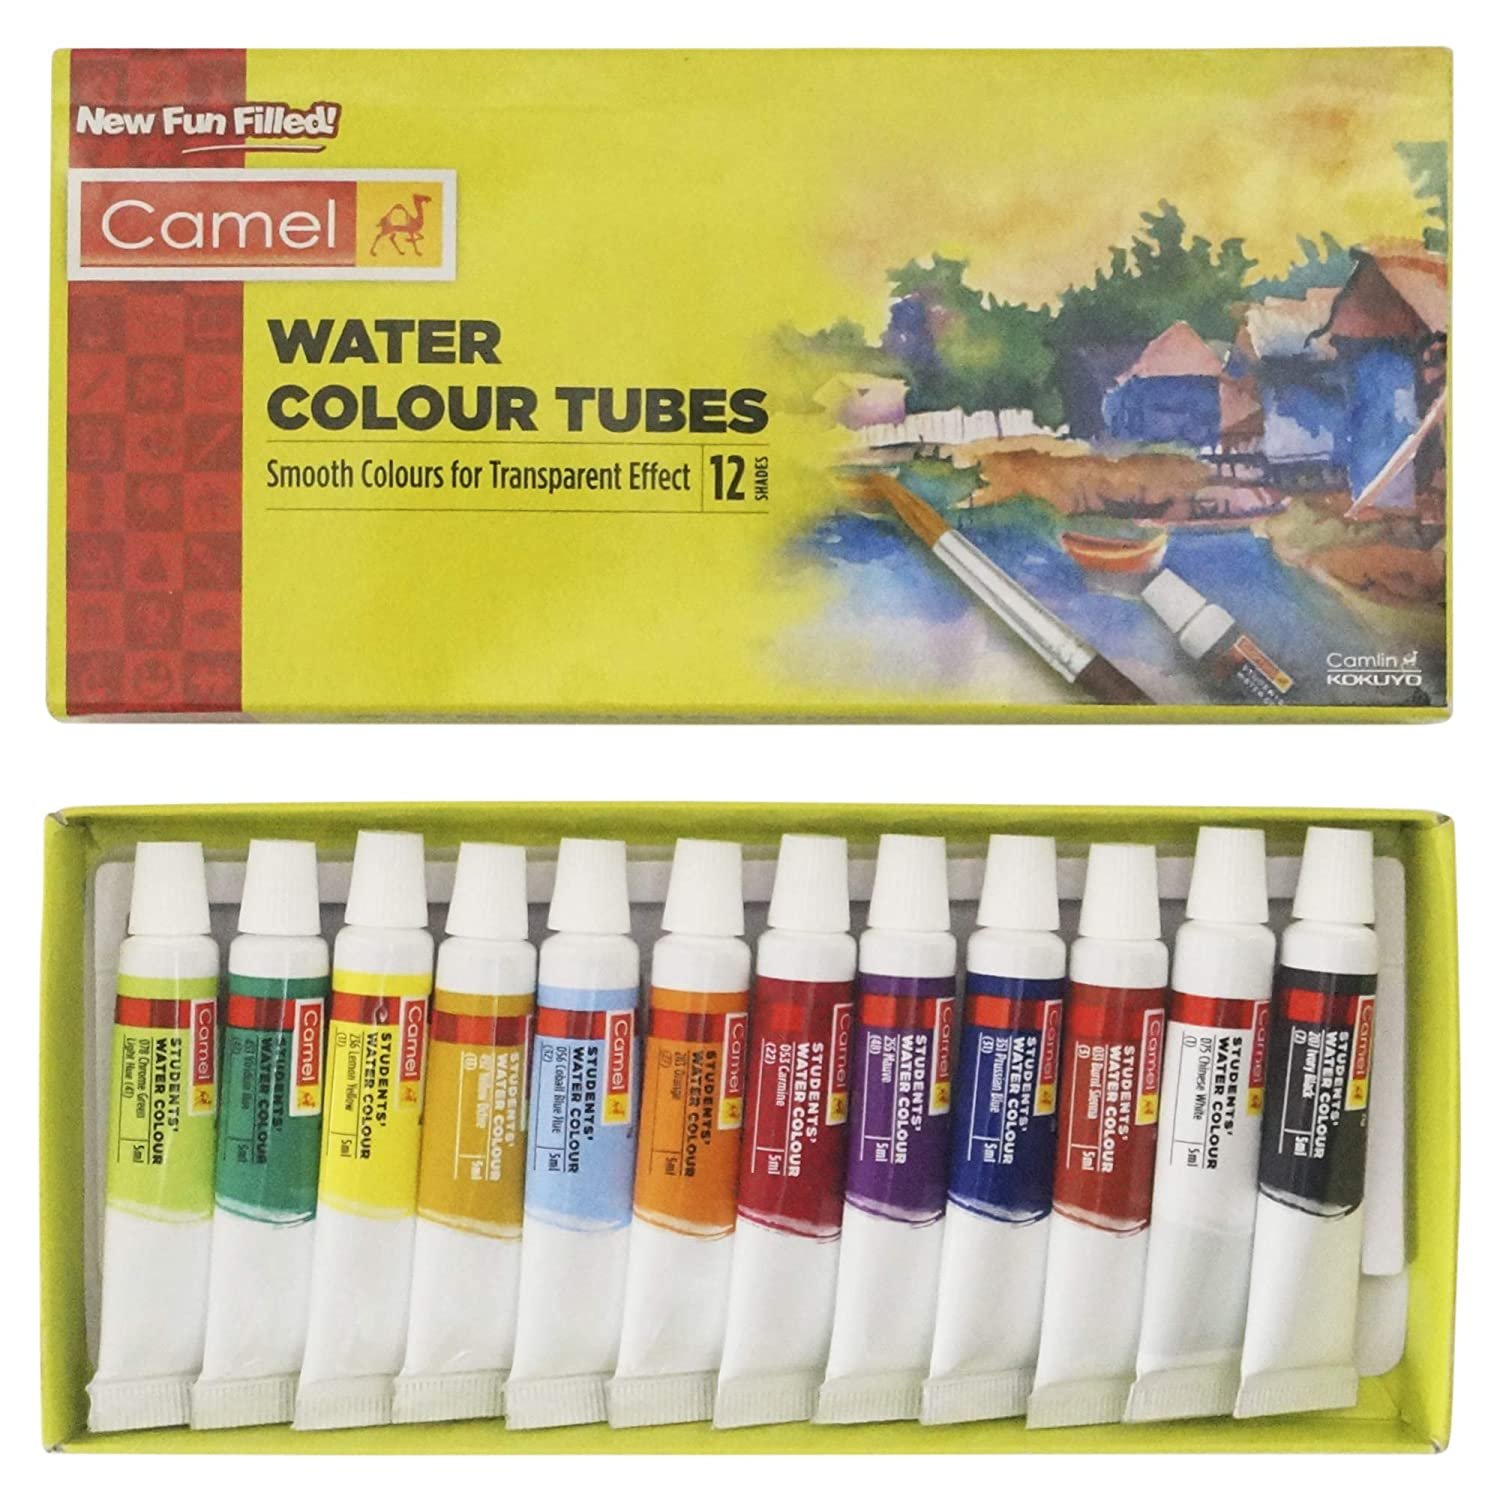 Camel Water Colour Tubes 12 Shades 01